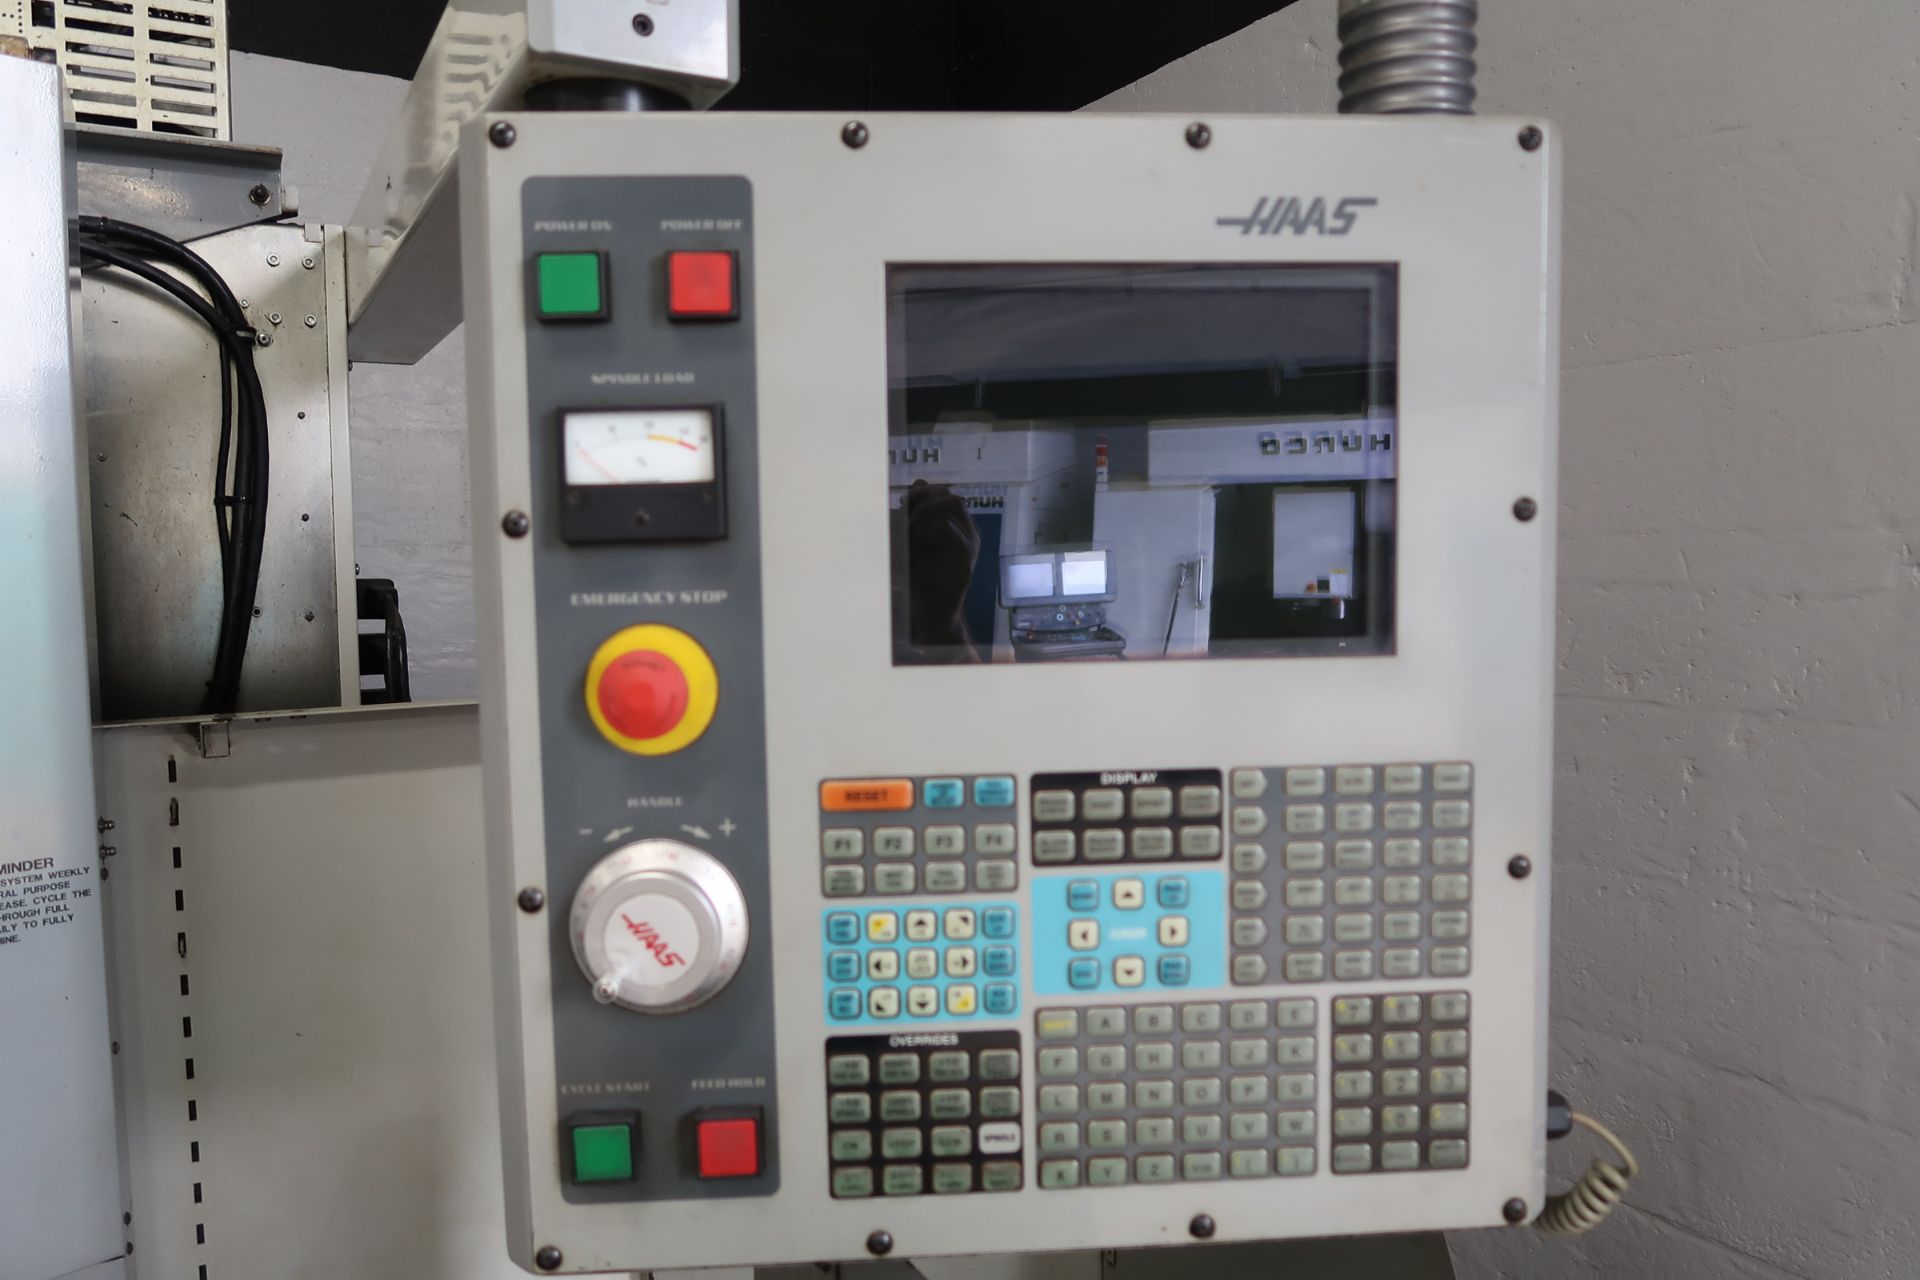 2003 Haas TM1 4-Axis CNC Tool Room Mill s/n 32804 w/ Haas Controls, 10- ATC, CAT-40, SOLD AS IS - Image 9 of 12